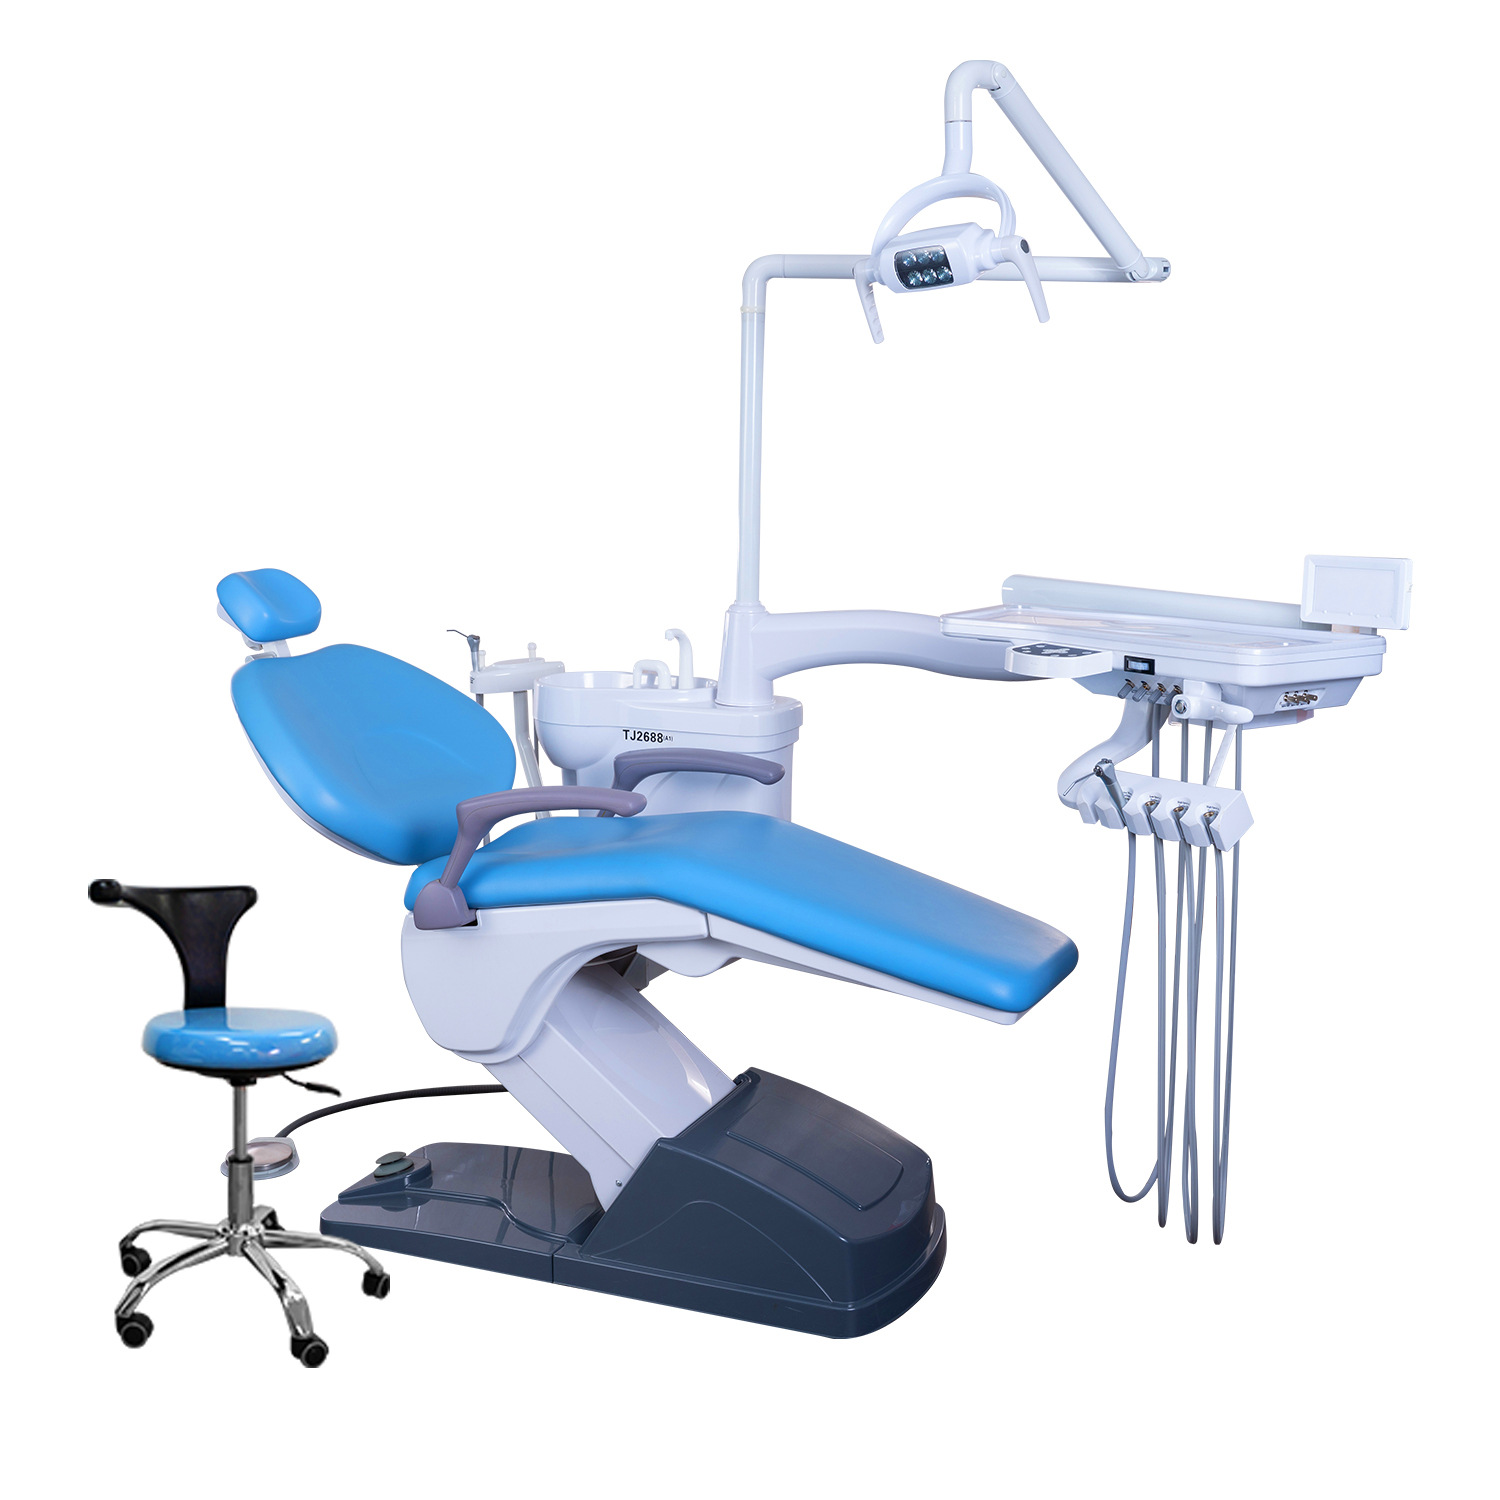 FLOWER MEDICAL Economic Model Dental Chair Product with One Dentist Stool price of dental unit equipments used chair